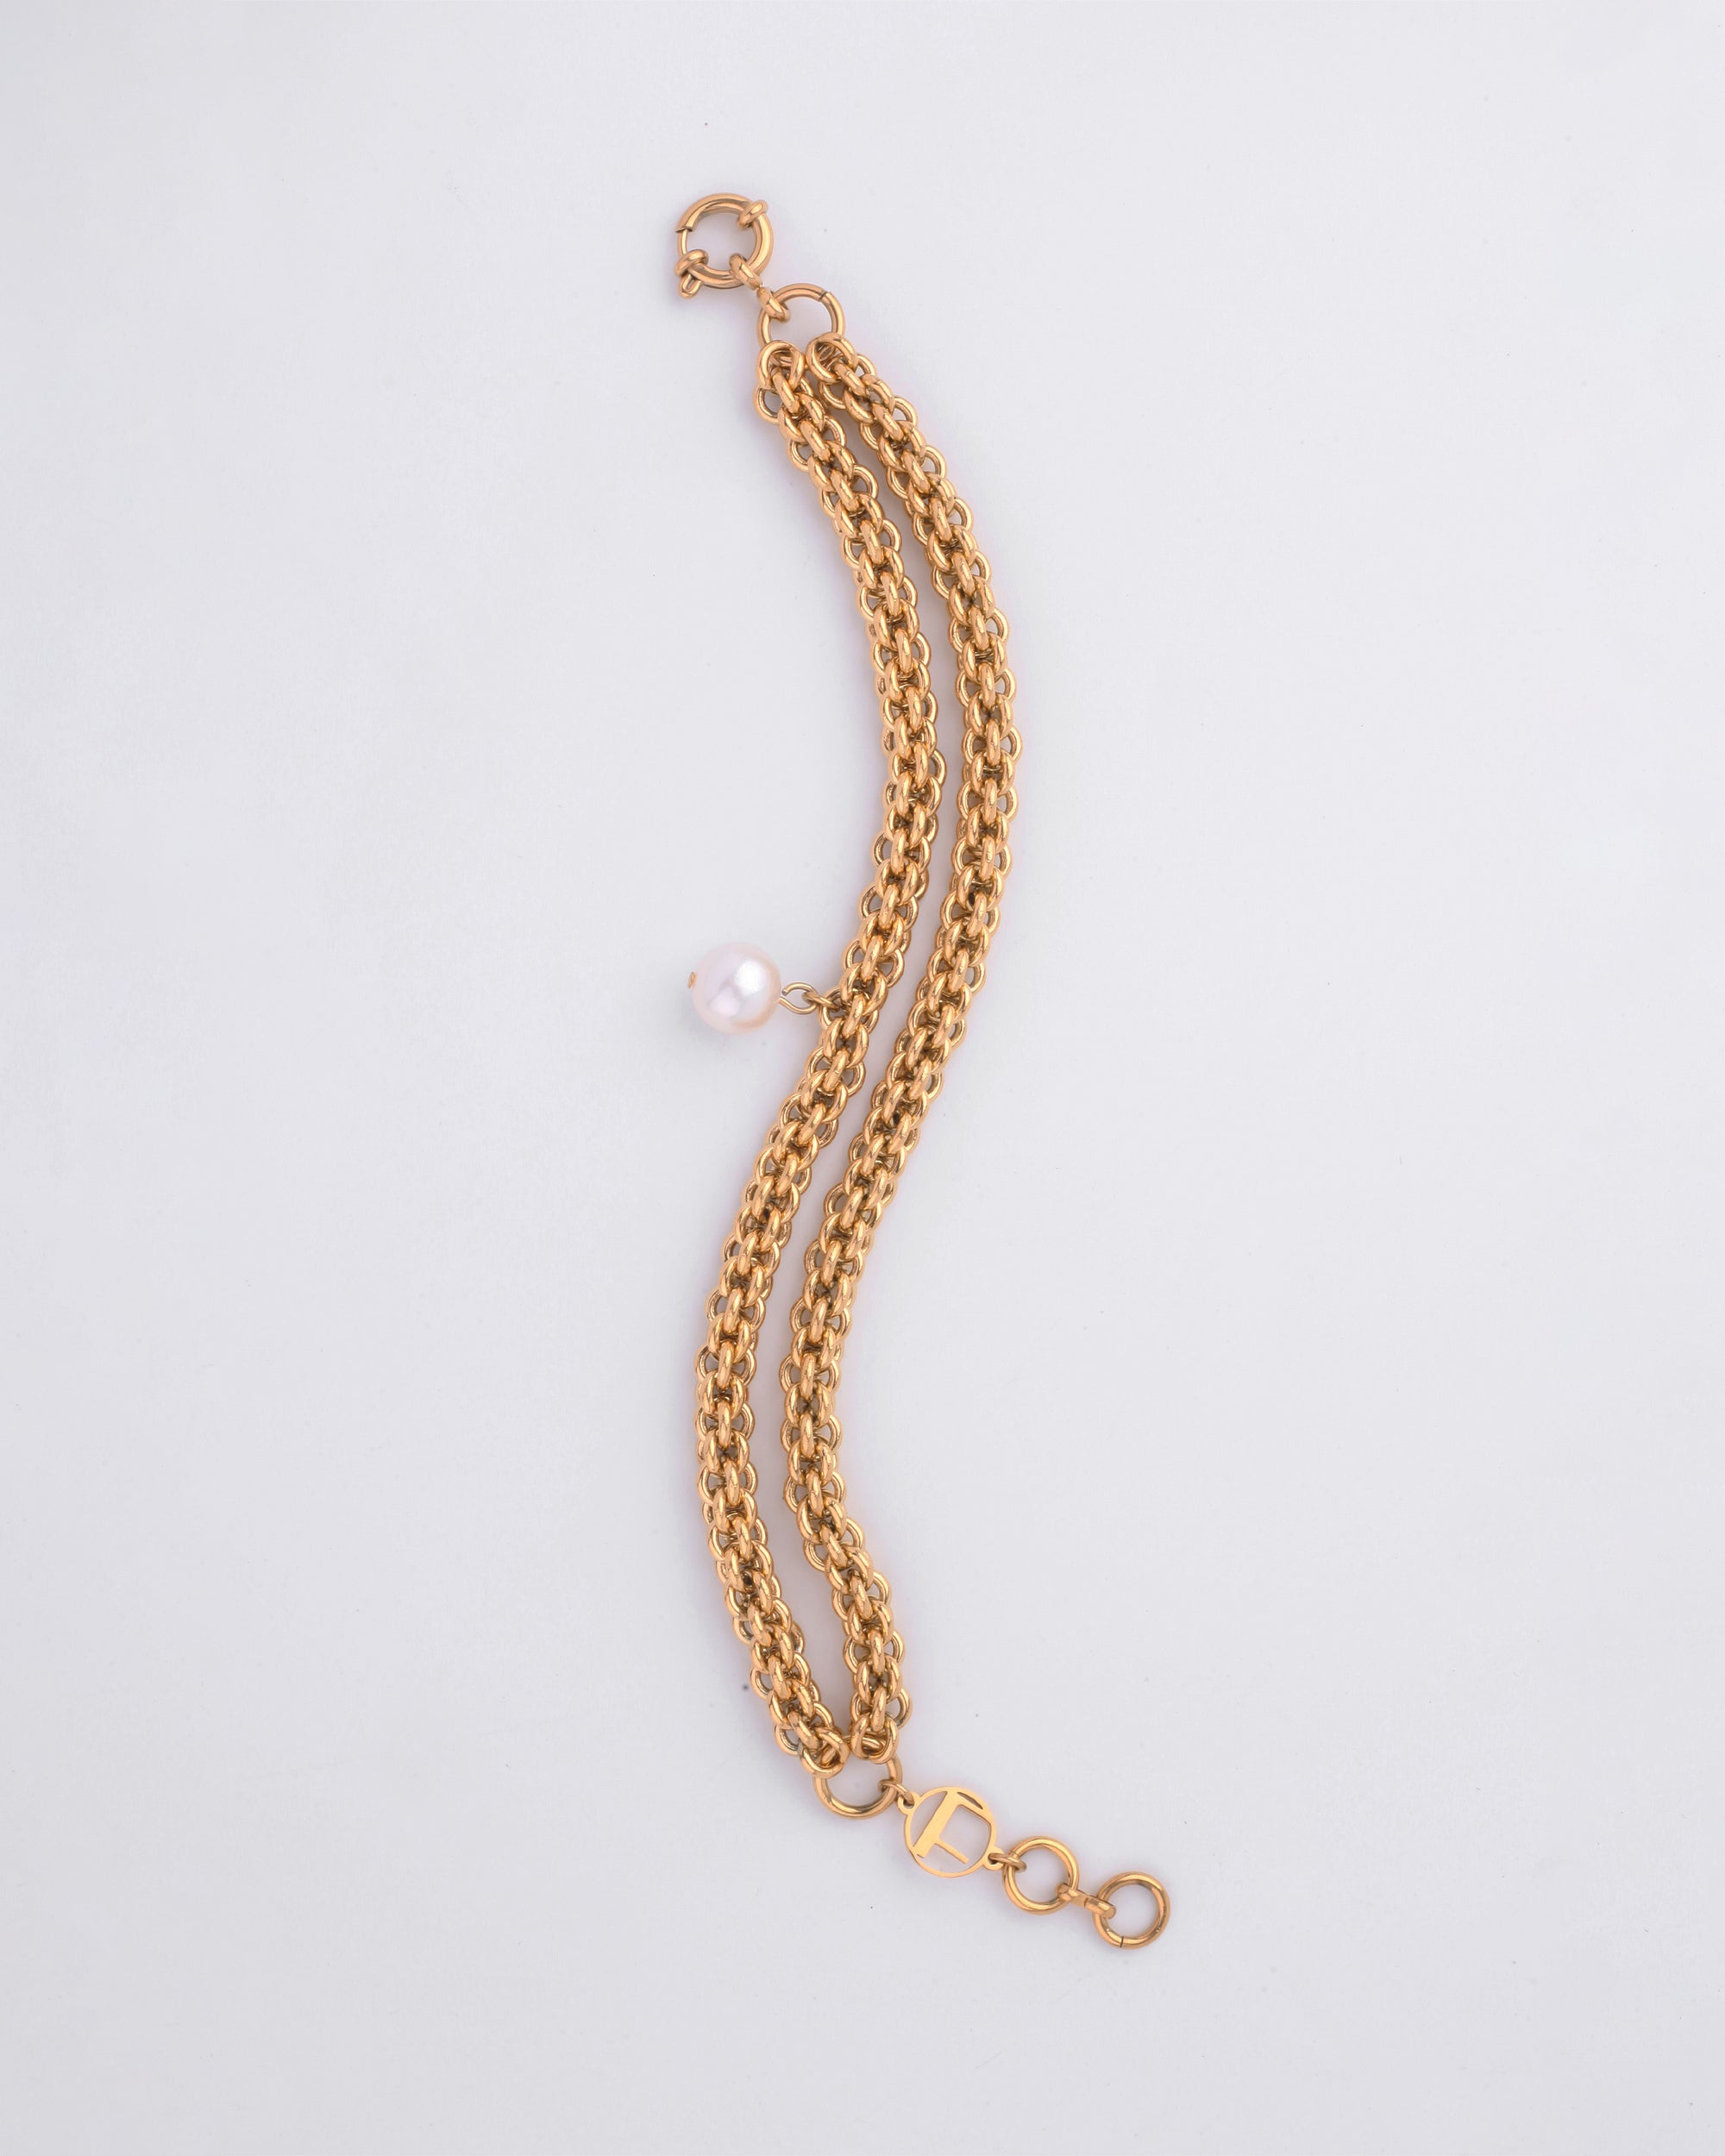 The For Art&#39;s Sake® Miller Bracelet features two strands intertwined together. One strand has a single freshwater pearl charm, adding a touch of elegance. The 18kt gold-plated bracelet boasts an adjustable loop segment for sizing and a clasp for fastening, all set against a plain white background.